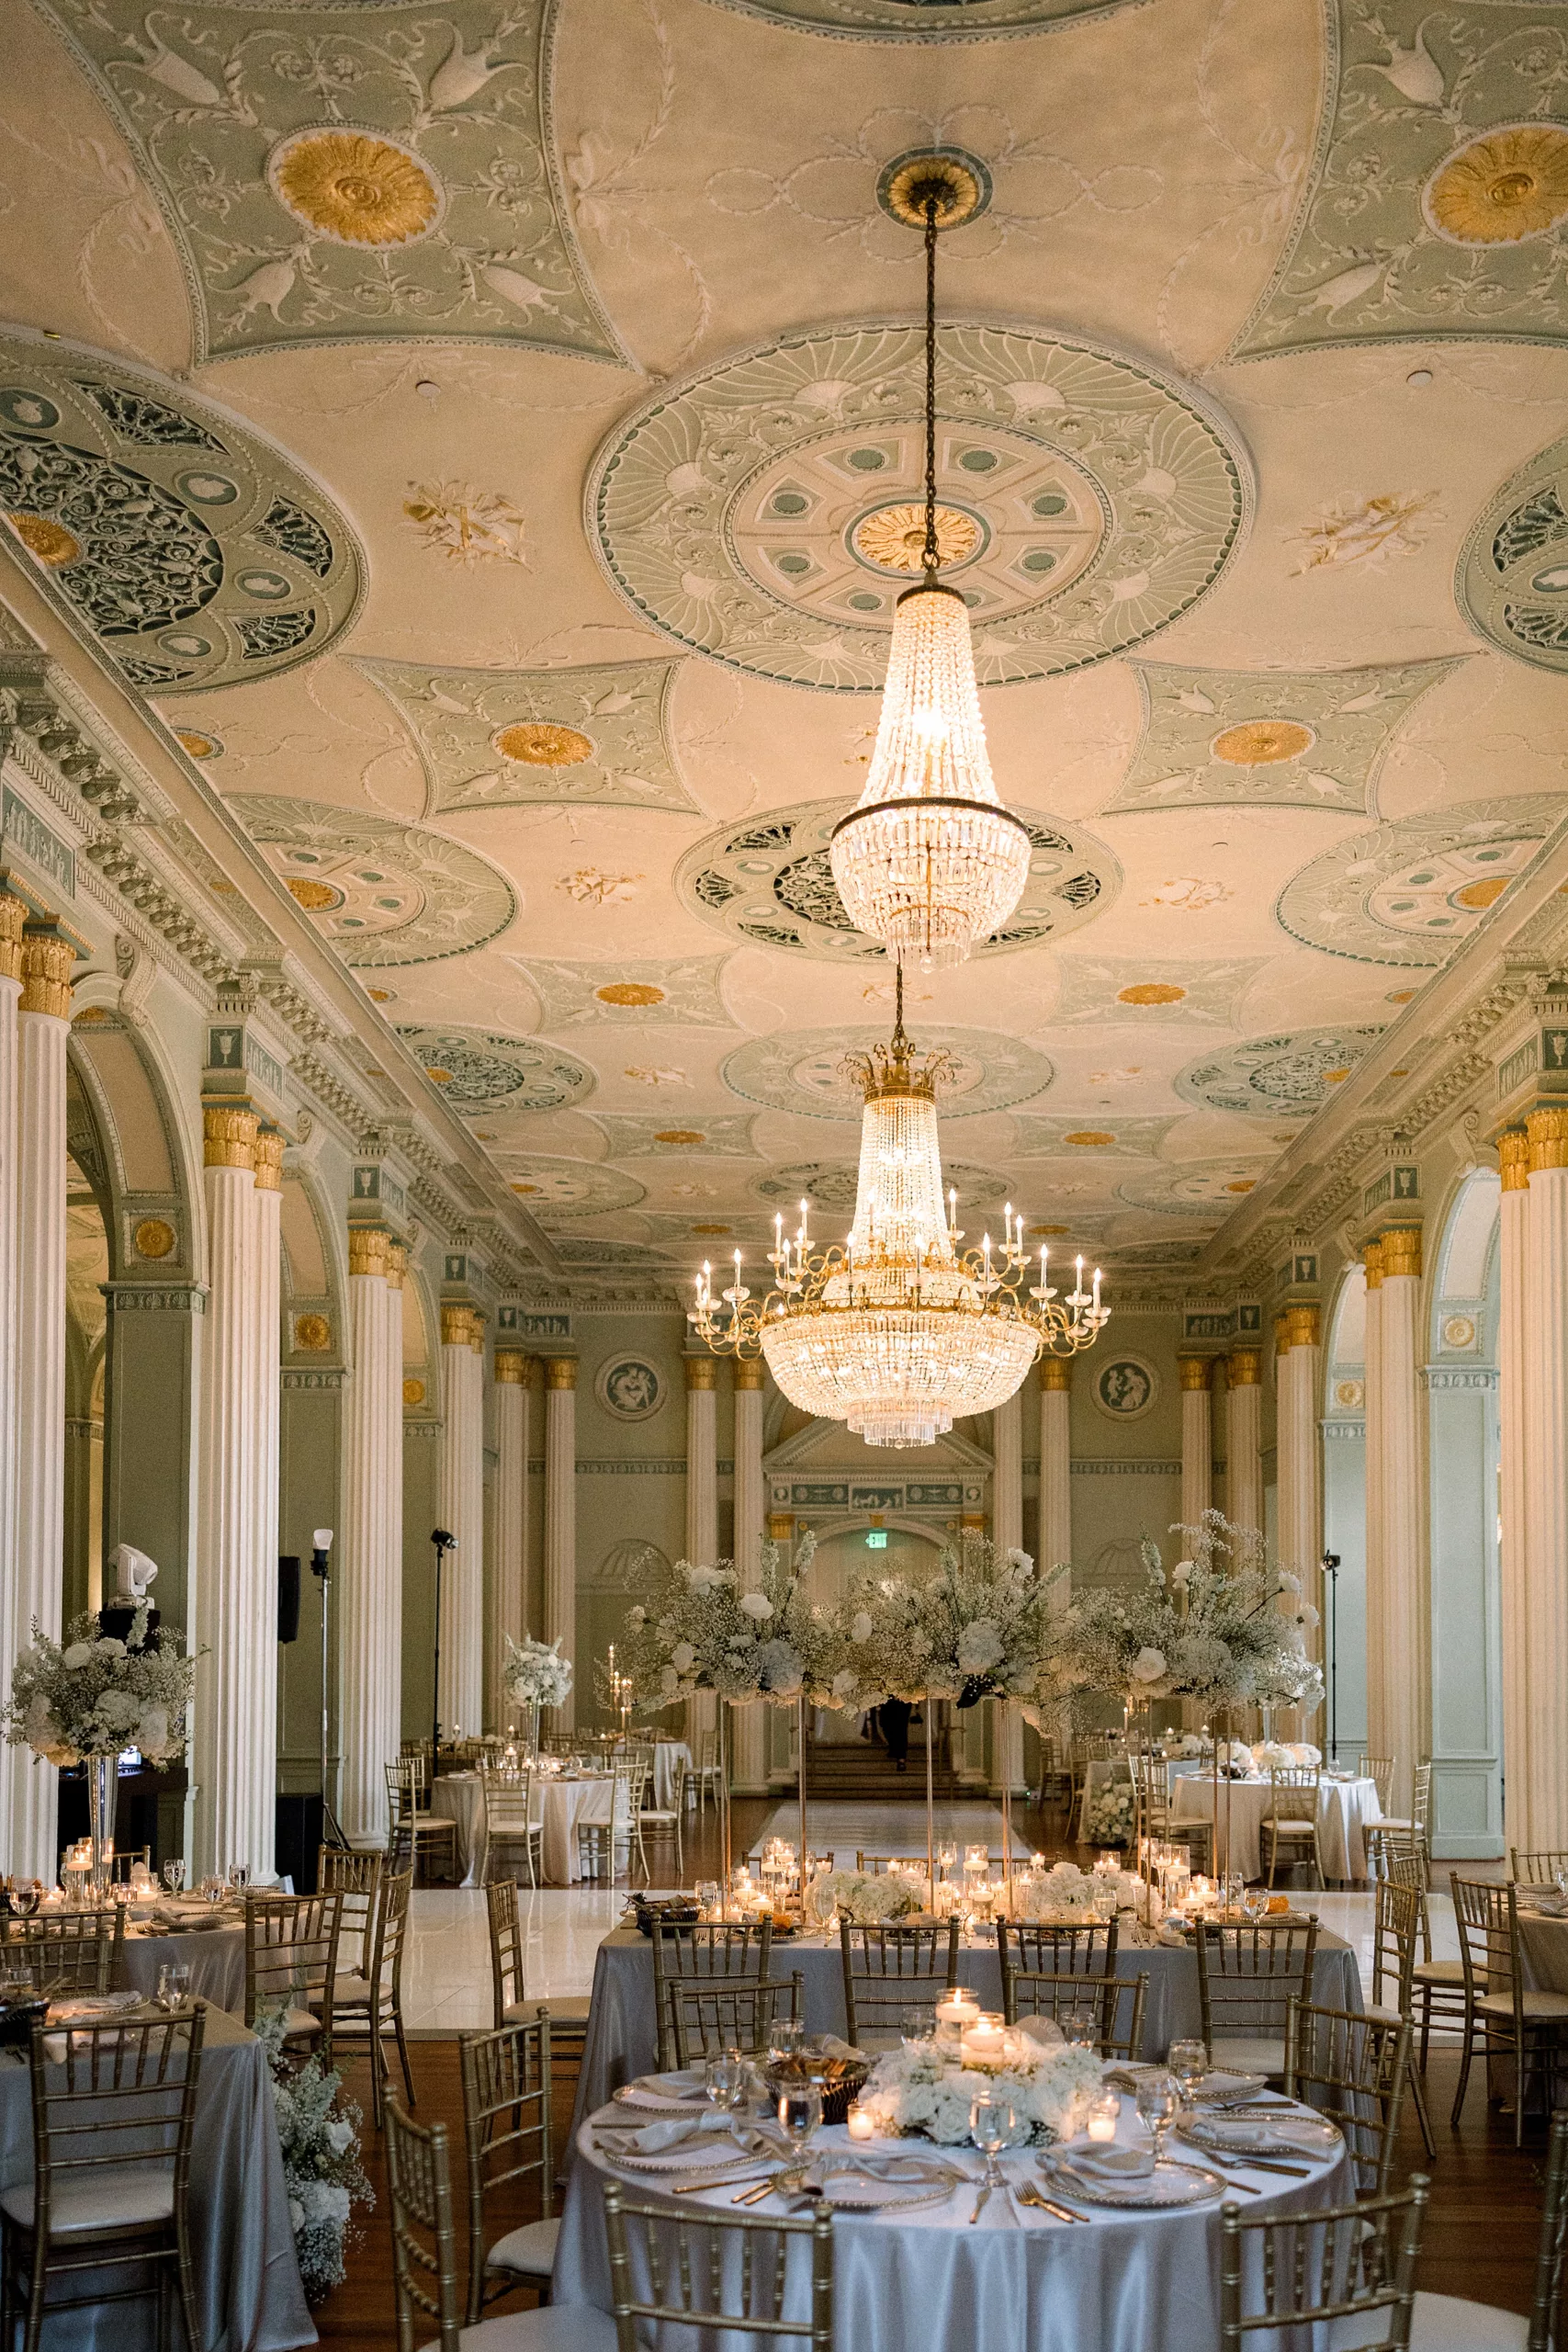 Details of an ornate wedding reception venue with chandeliers Biltmore Ballrooms Wedding